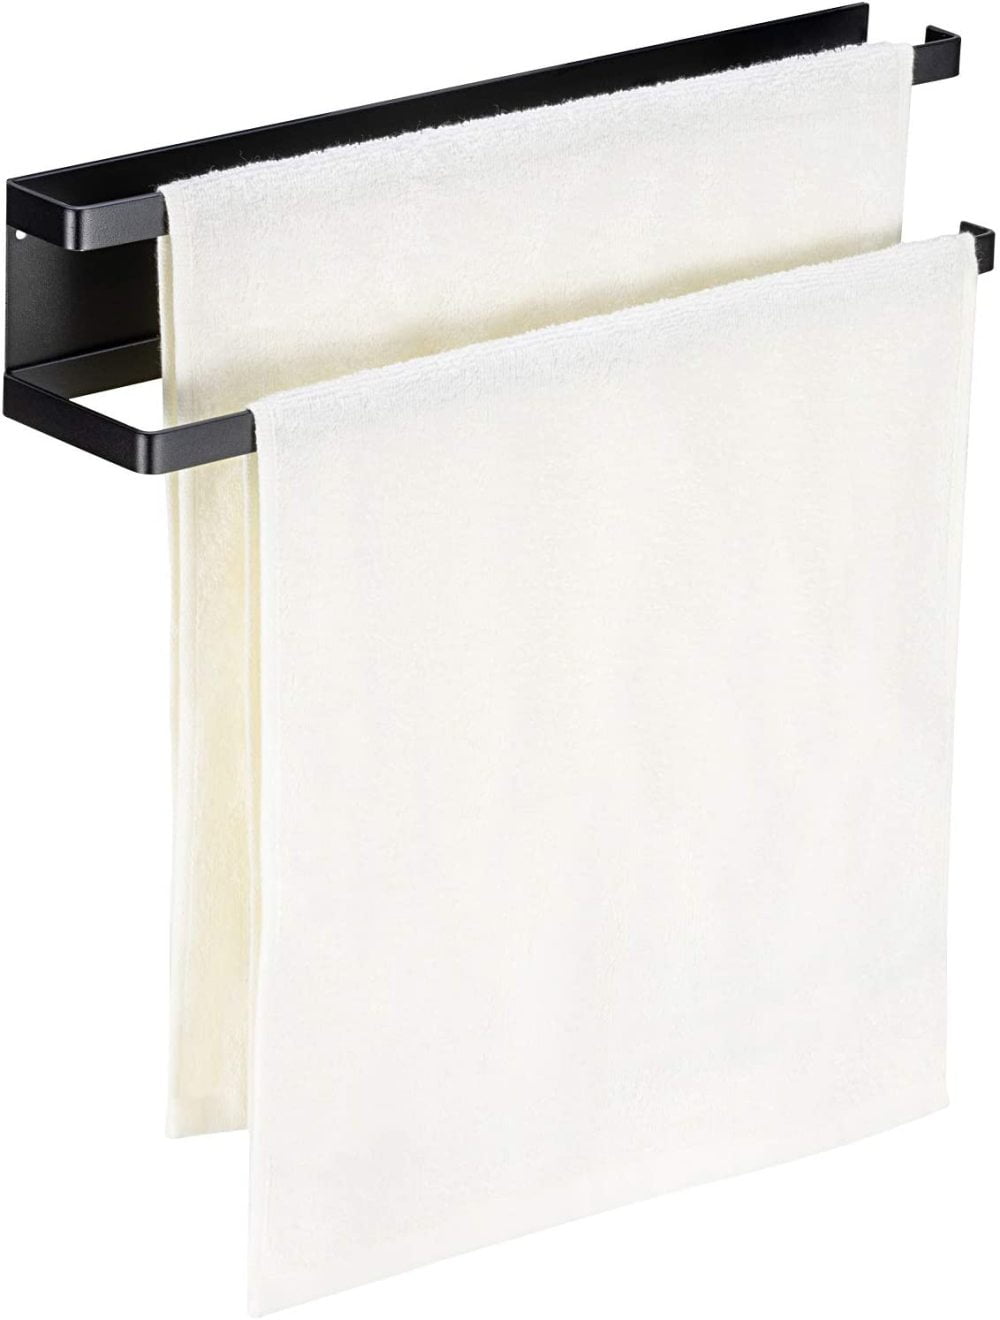 TaliaPosy Magnetic Towel Bar for Refrigerator, Kitchen Towel Holder Dish Towel Hanger 15.7 for Hand Tea Towels, for Kitchen Stove, Oven, Dishwasher, Laundry Washing Machine, No Drilling, Black" - Walmart.com